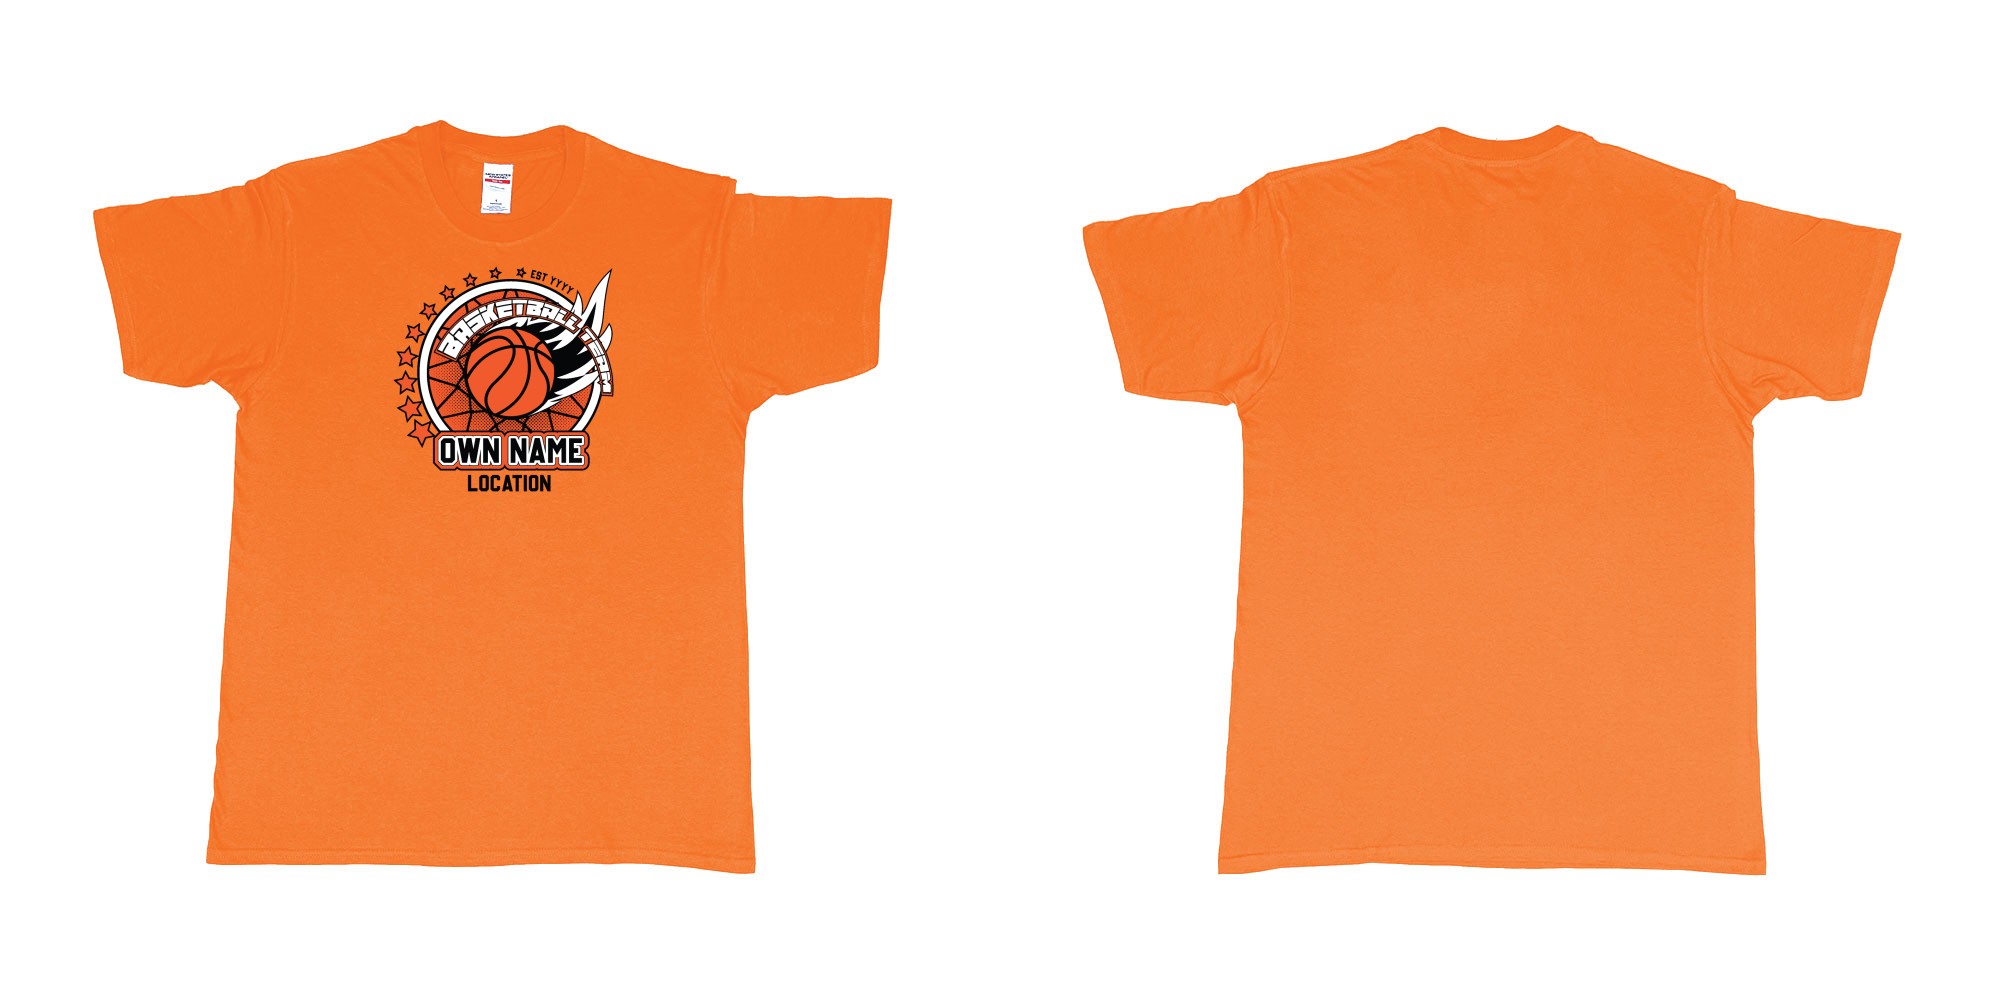 Custom tshirt design basketball team own name location established year custom design production bali in fabric color orange choice your own text made in Bali by The Pirate Way